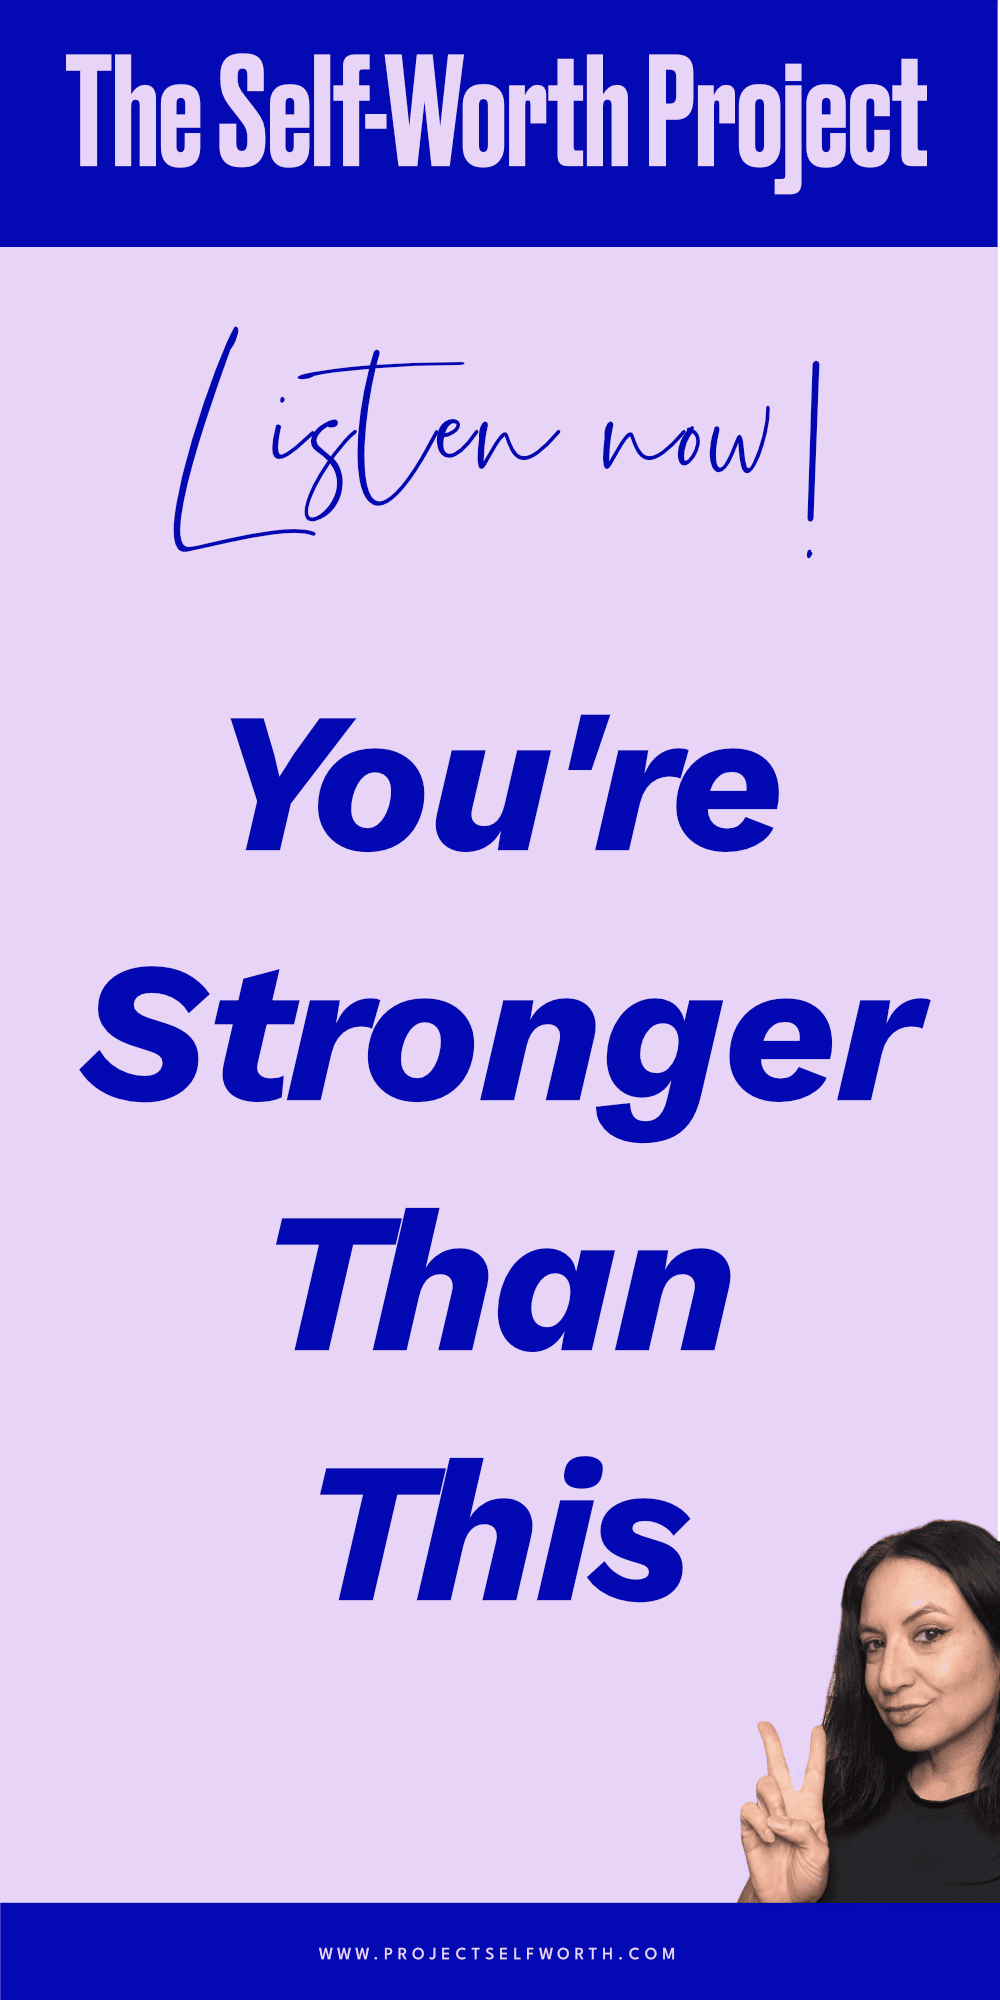 Episode #21: You're Stronger Than This